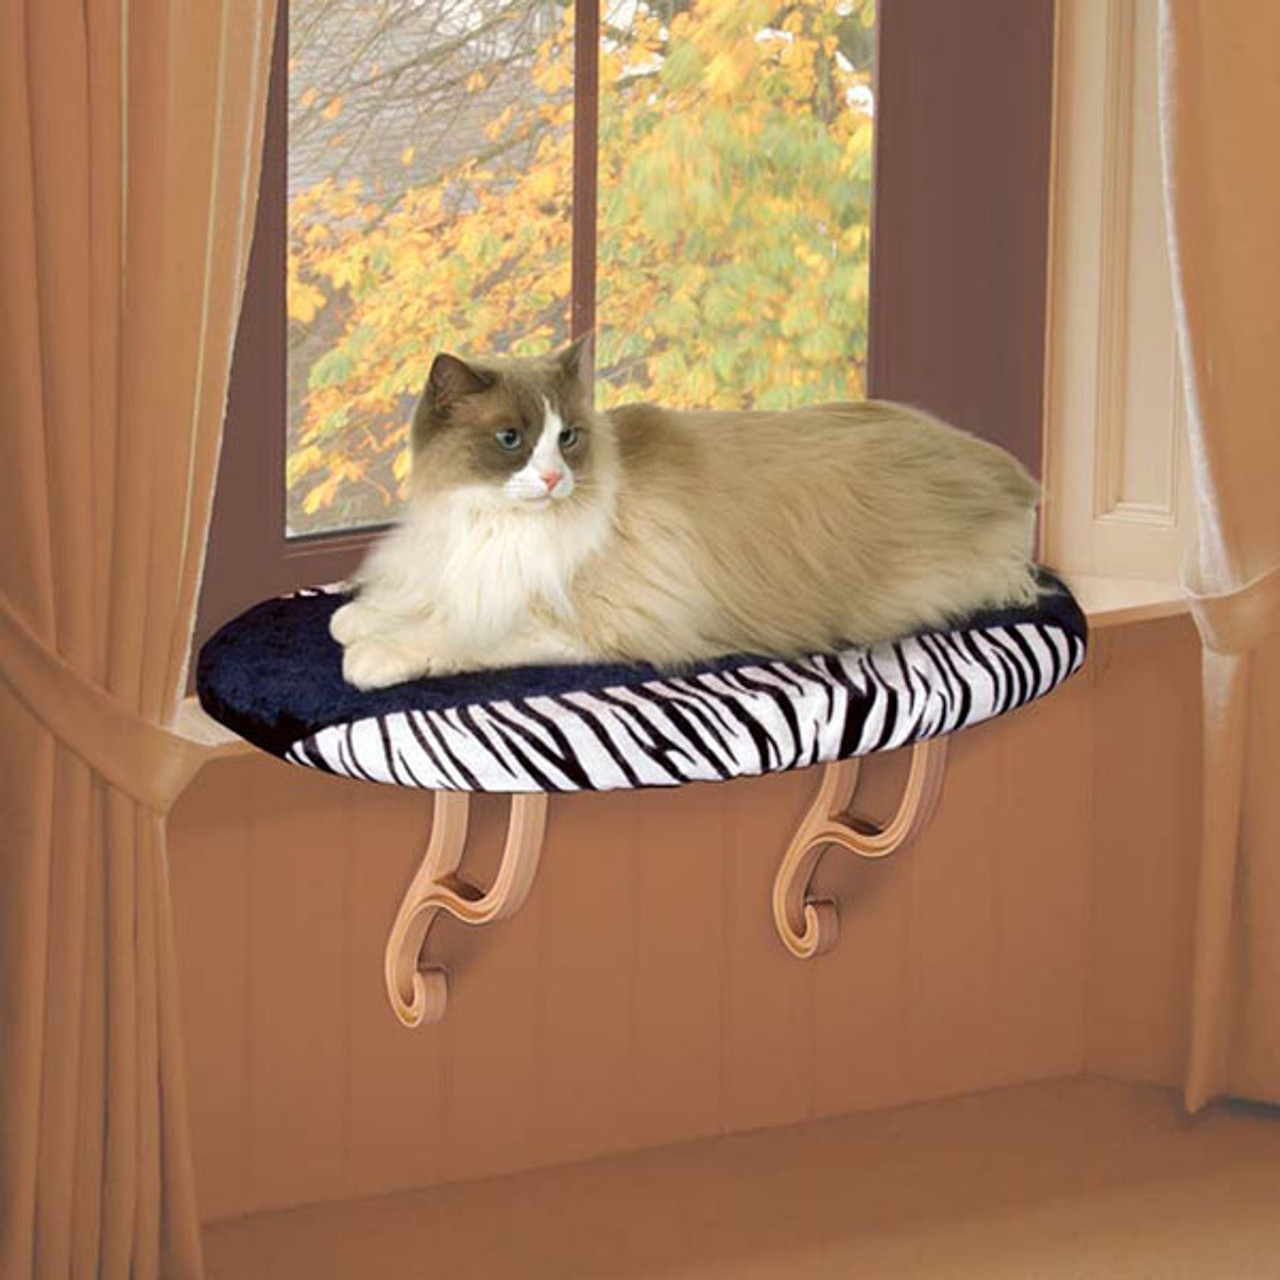 This sturdy design will support the largest of cats!